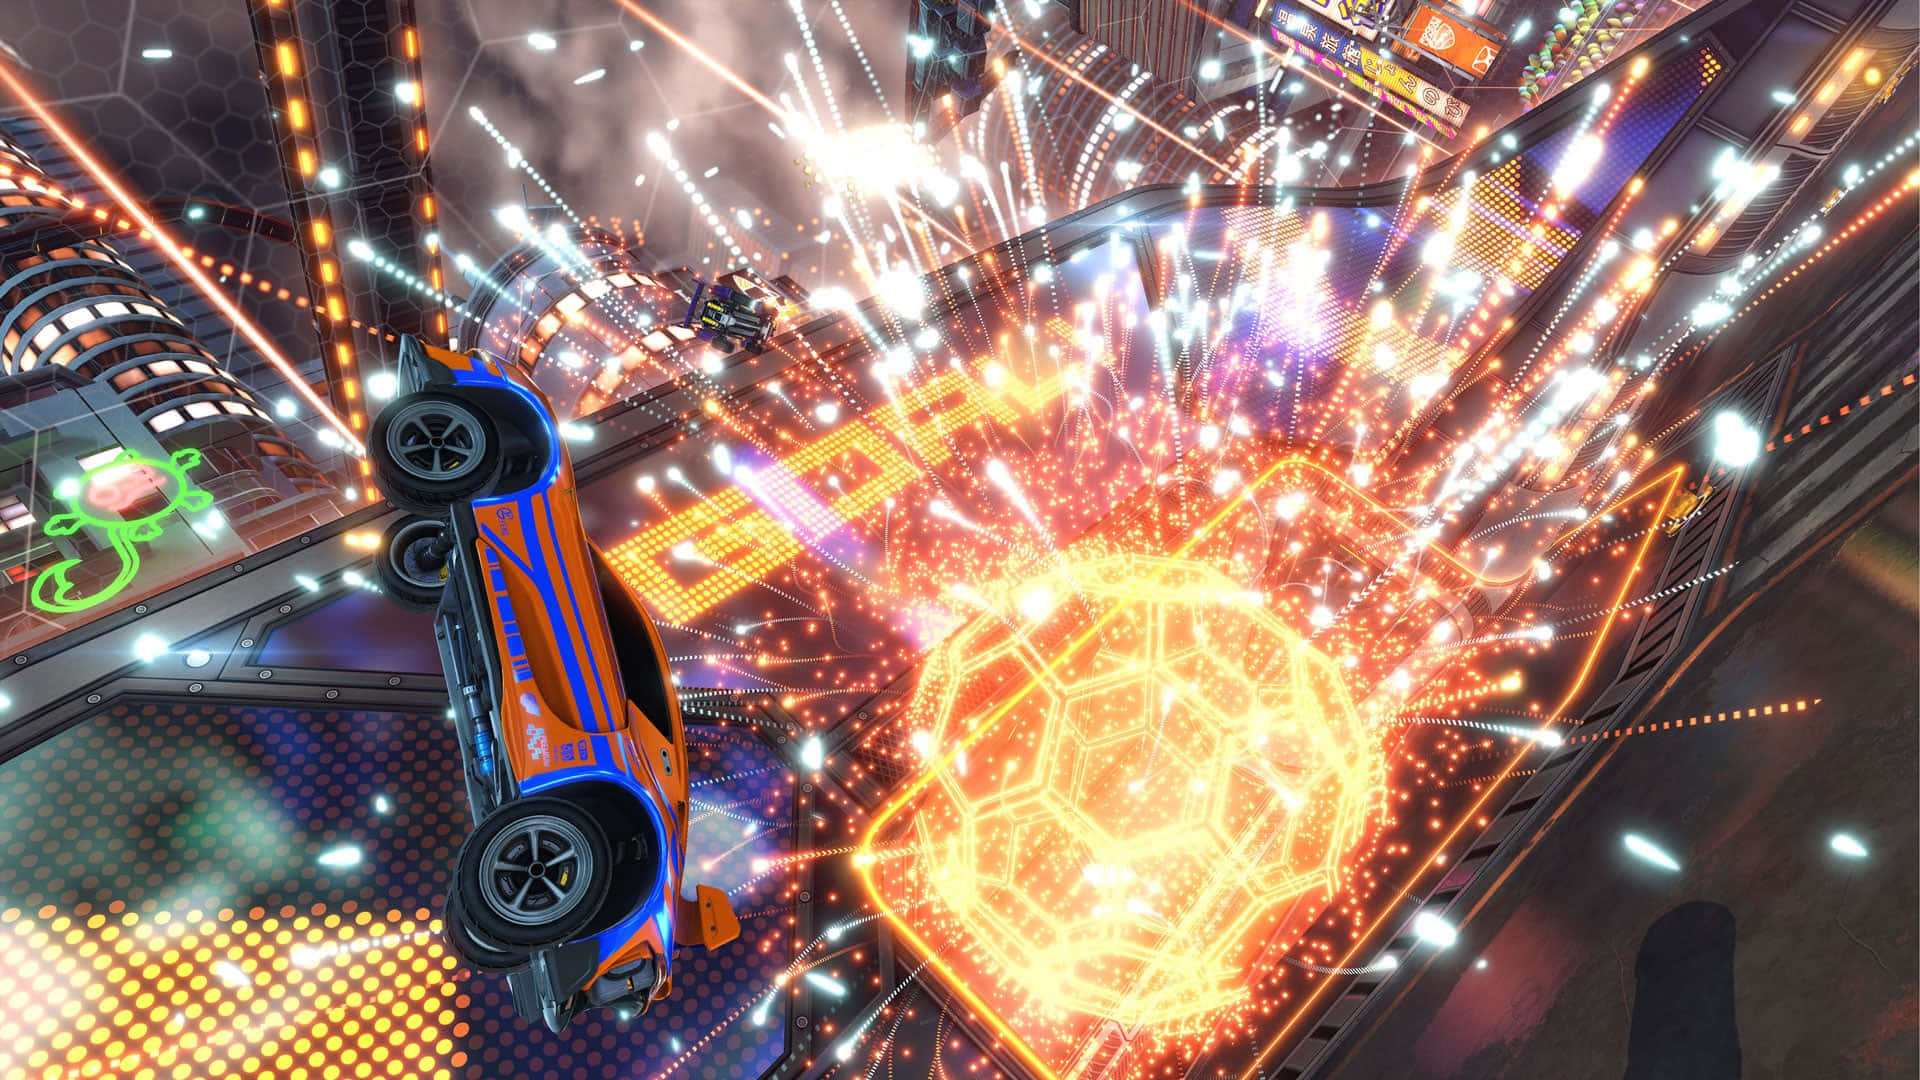 Enjoy the rush of blazing fast racing on an epic scale with Rocket League!